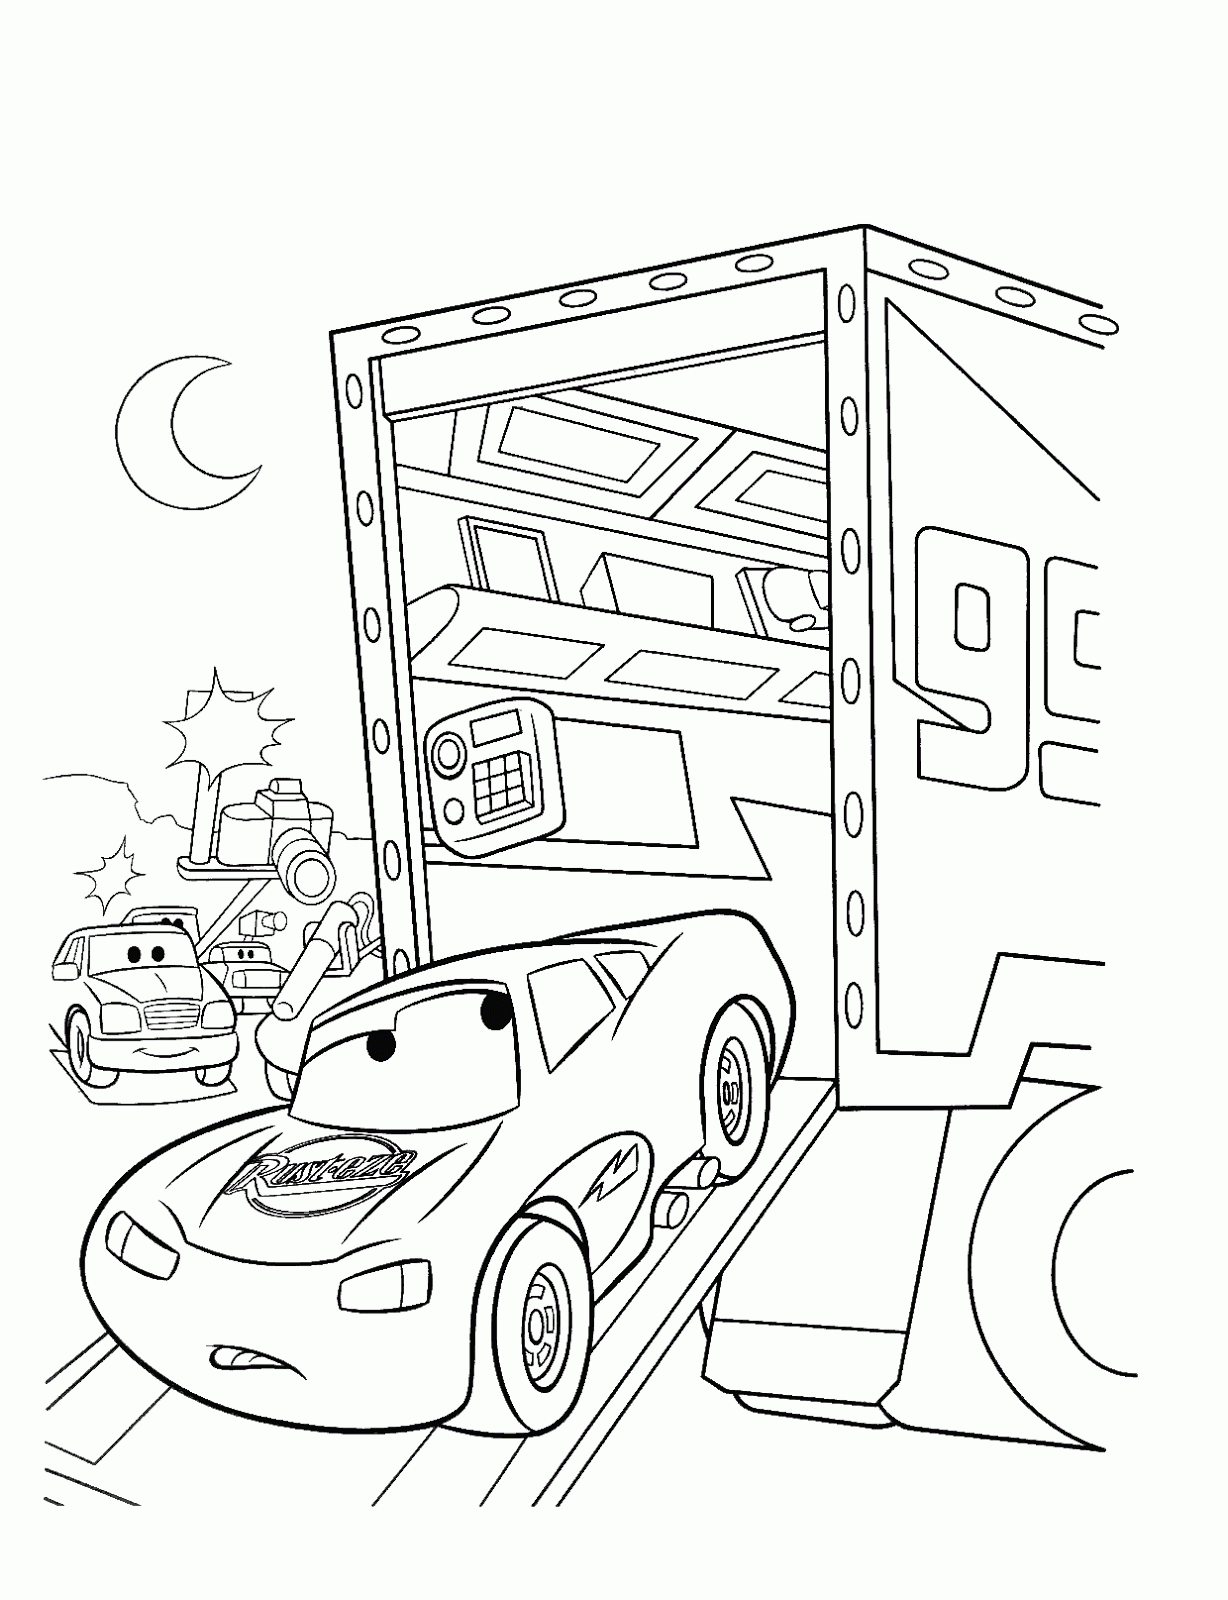 free printable coloring page for your kids - page 4 : Coloring 